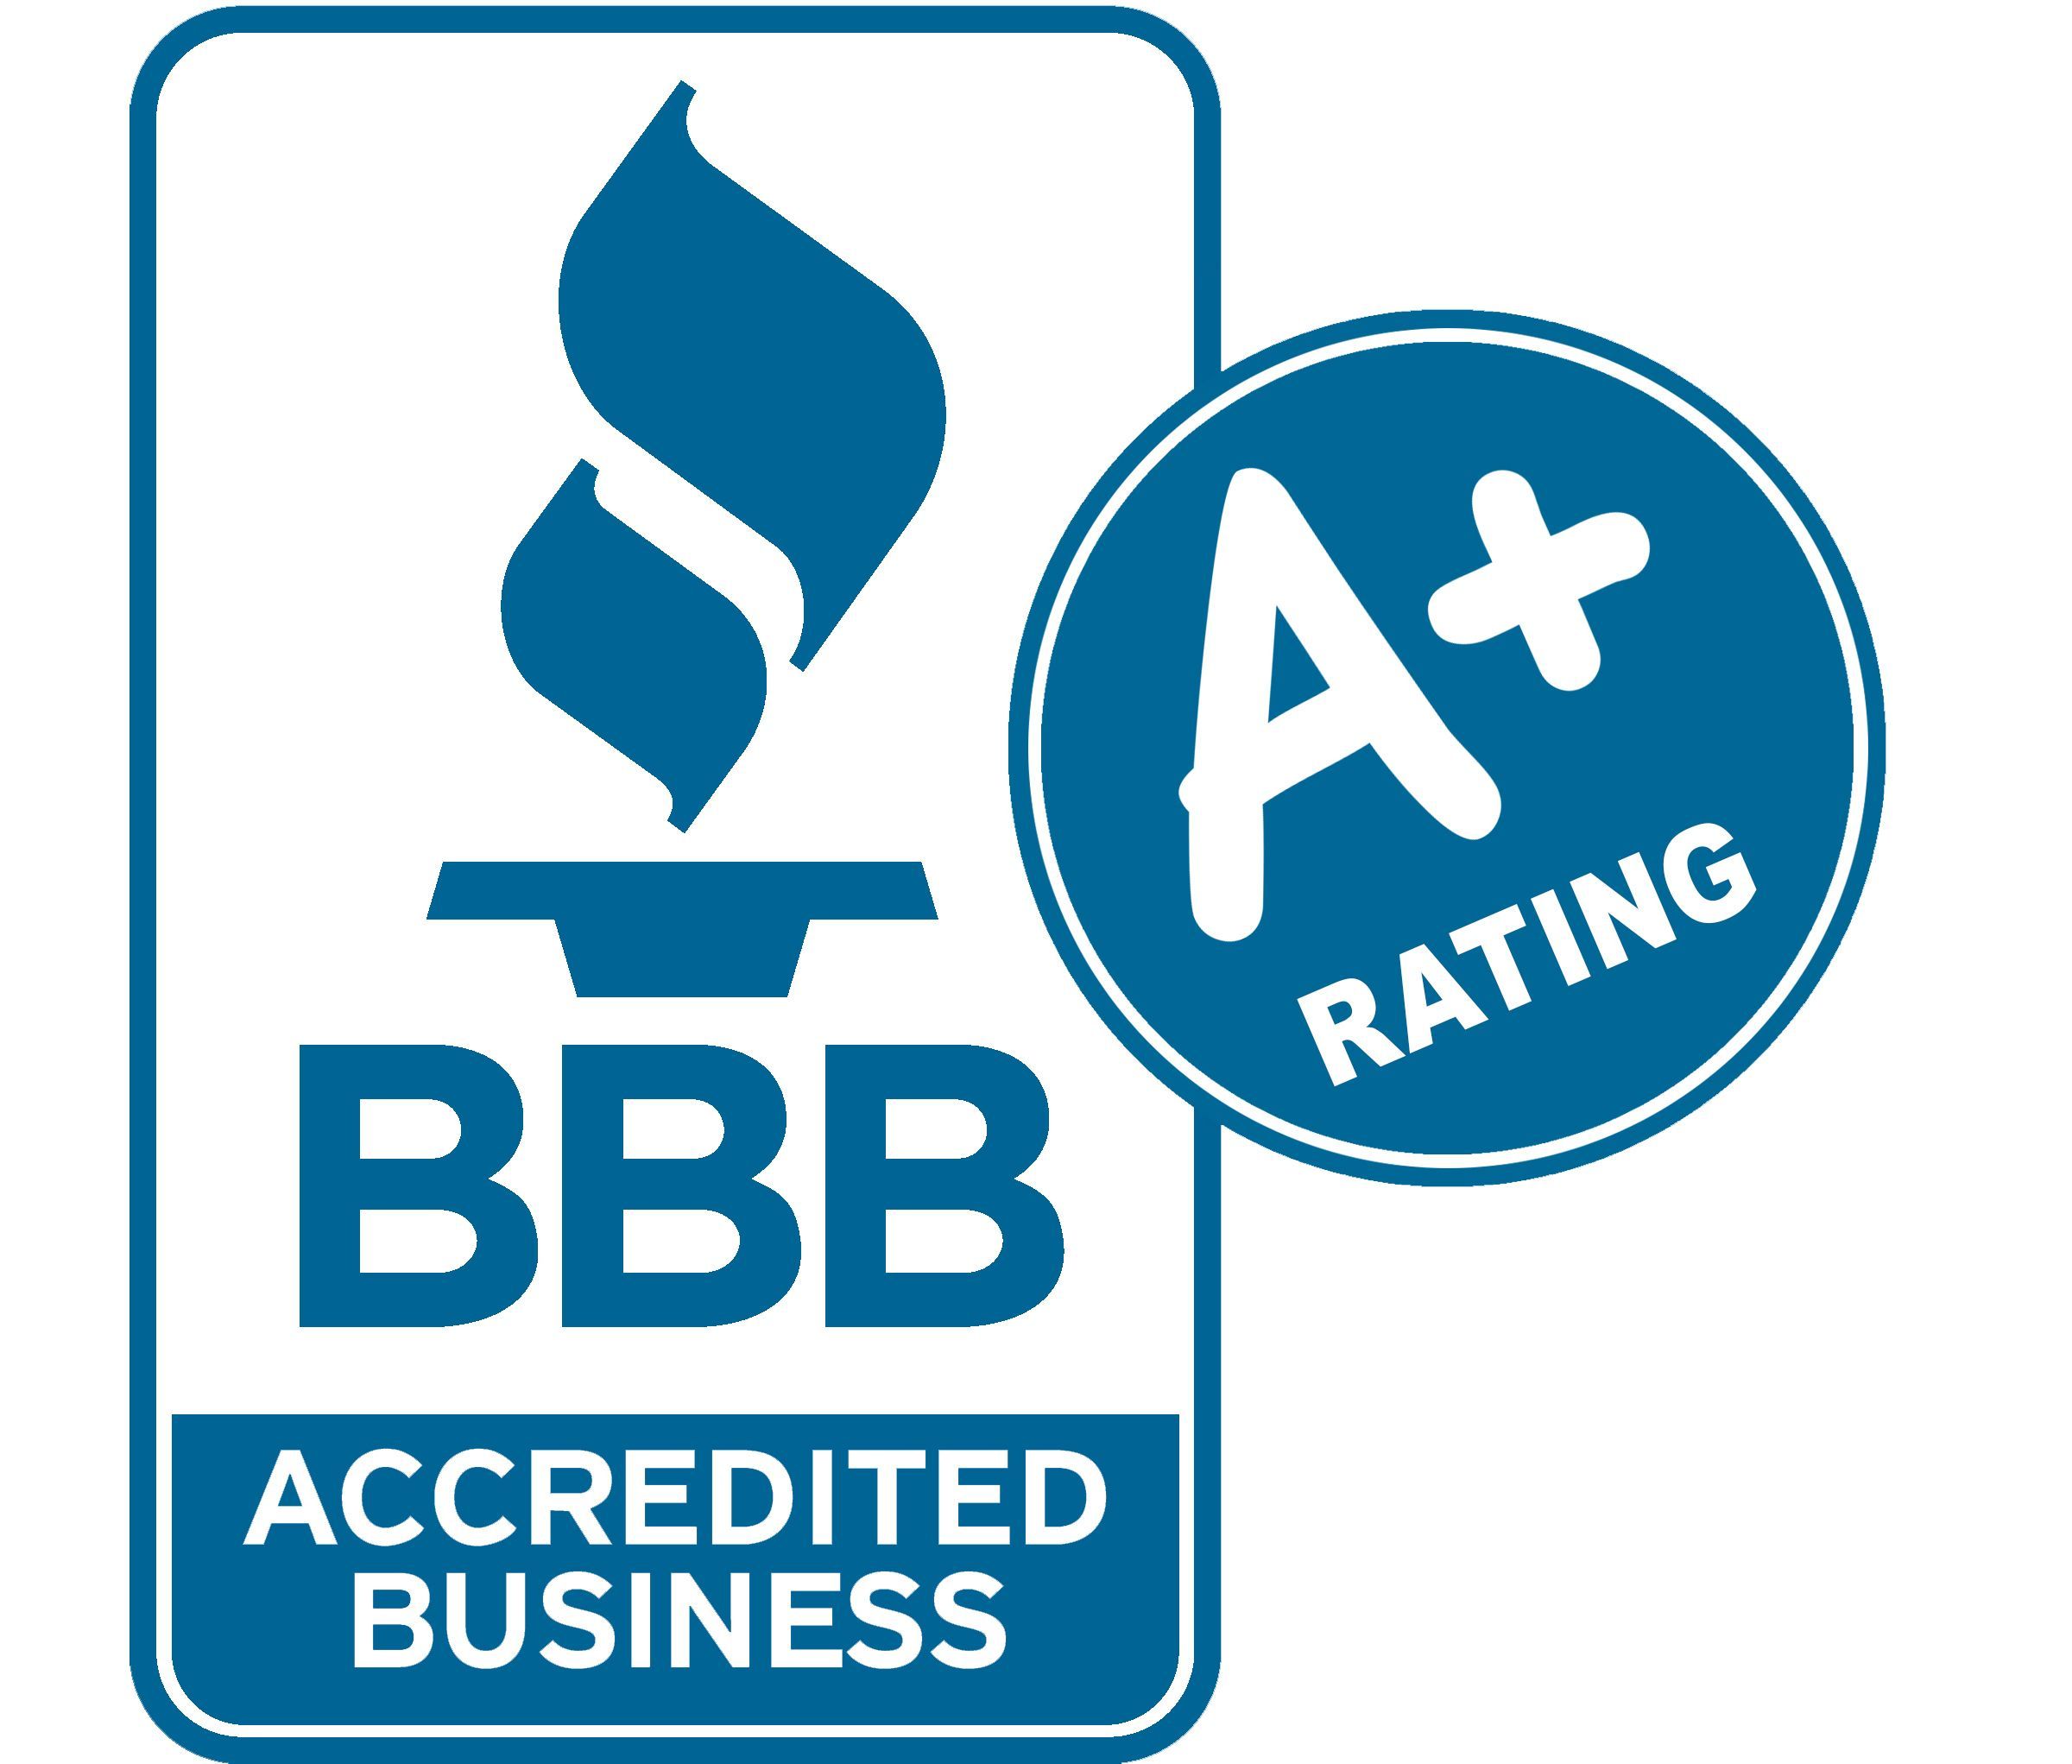 Atlantic Pressure Washers is an accredited business with an A+ rating at the BBB